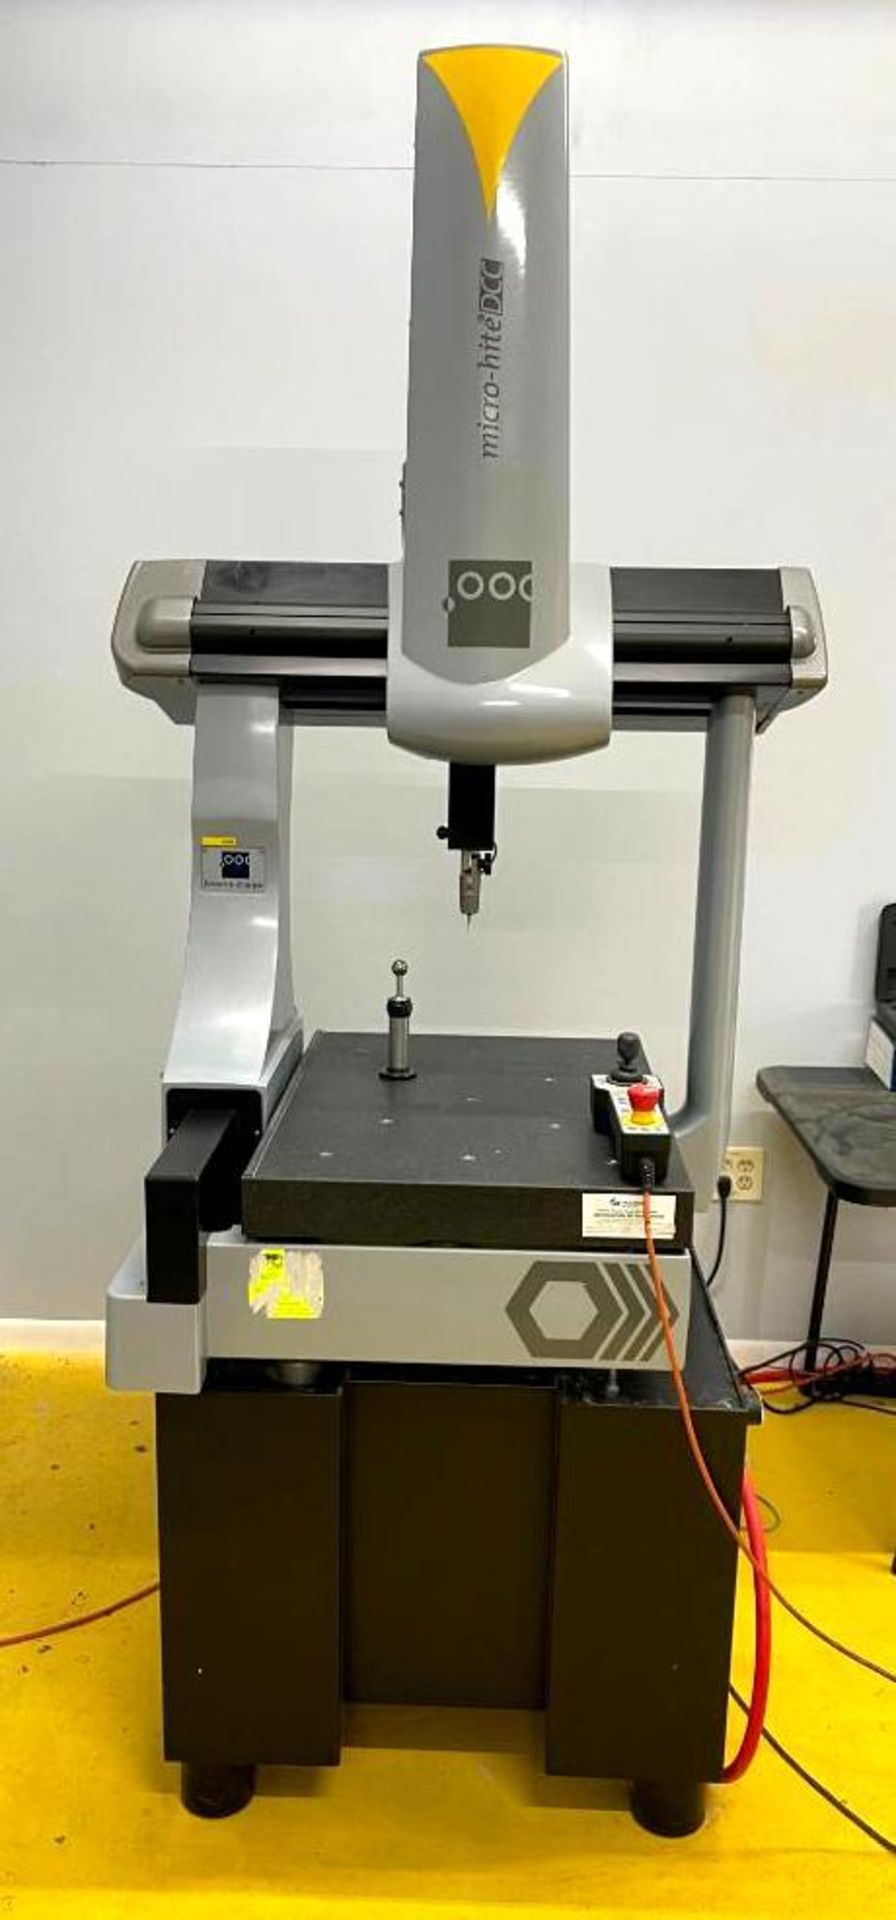 DESCRIPTION: 2006 GLOBAL SF COORDINATE MEASURING MACHINE (SOFTWARE NEEDS TO BE UPDATED) BRAND/MODEL: